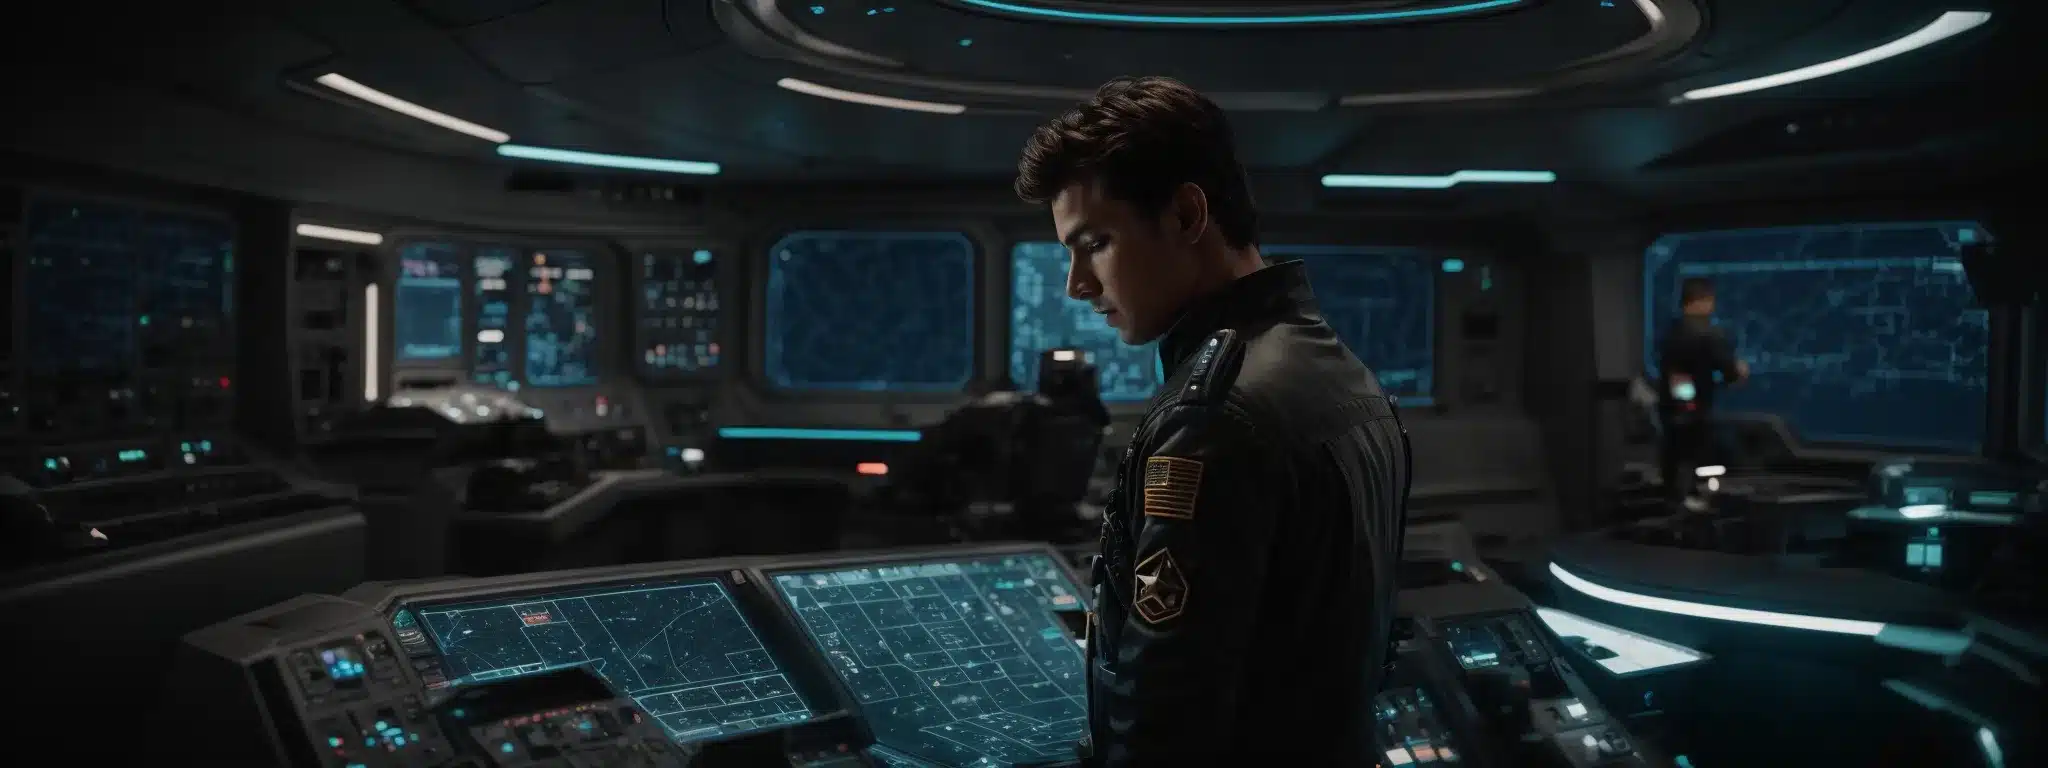 A Starship Captain Stands At The Helm, Intently Studying A Holographic Star Map Strewn Across The Console, Poised To Navigate The Uncharted Space Of Market Success.